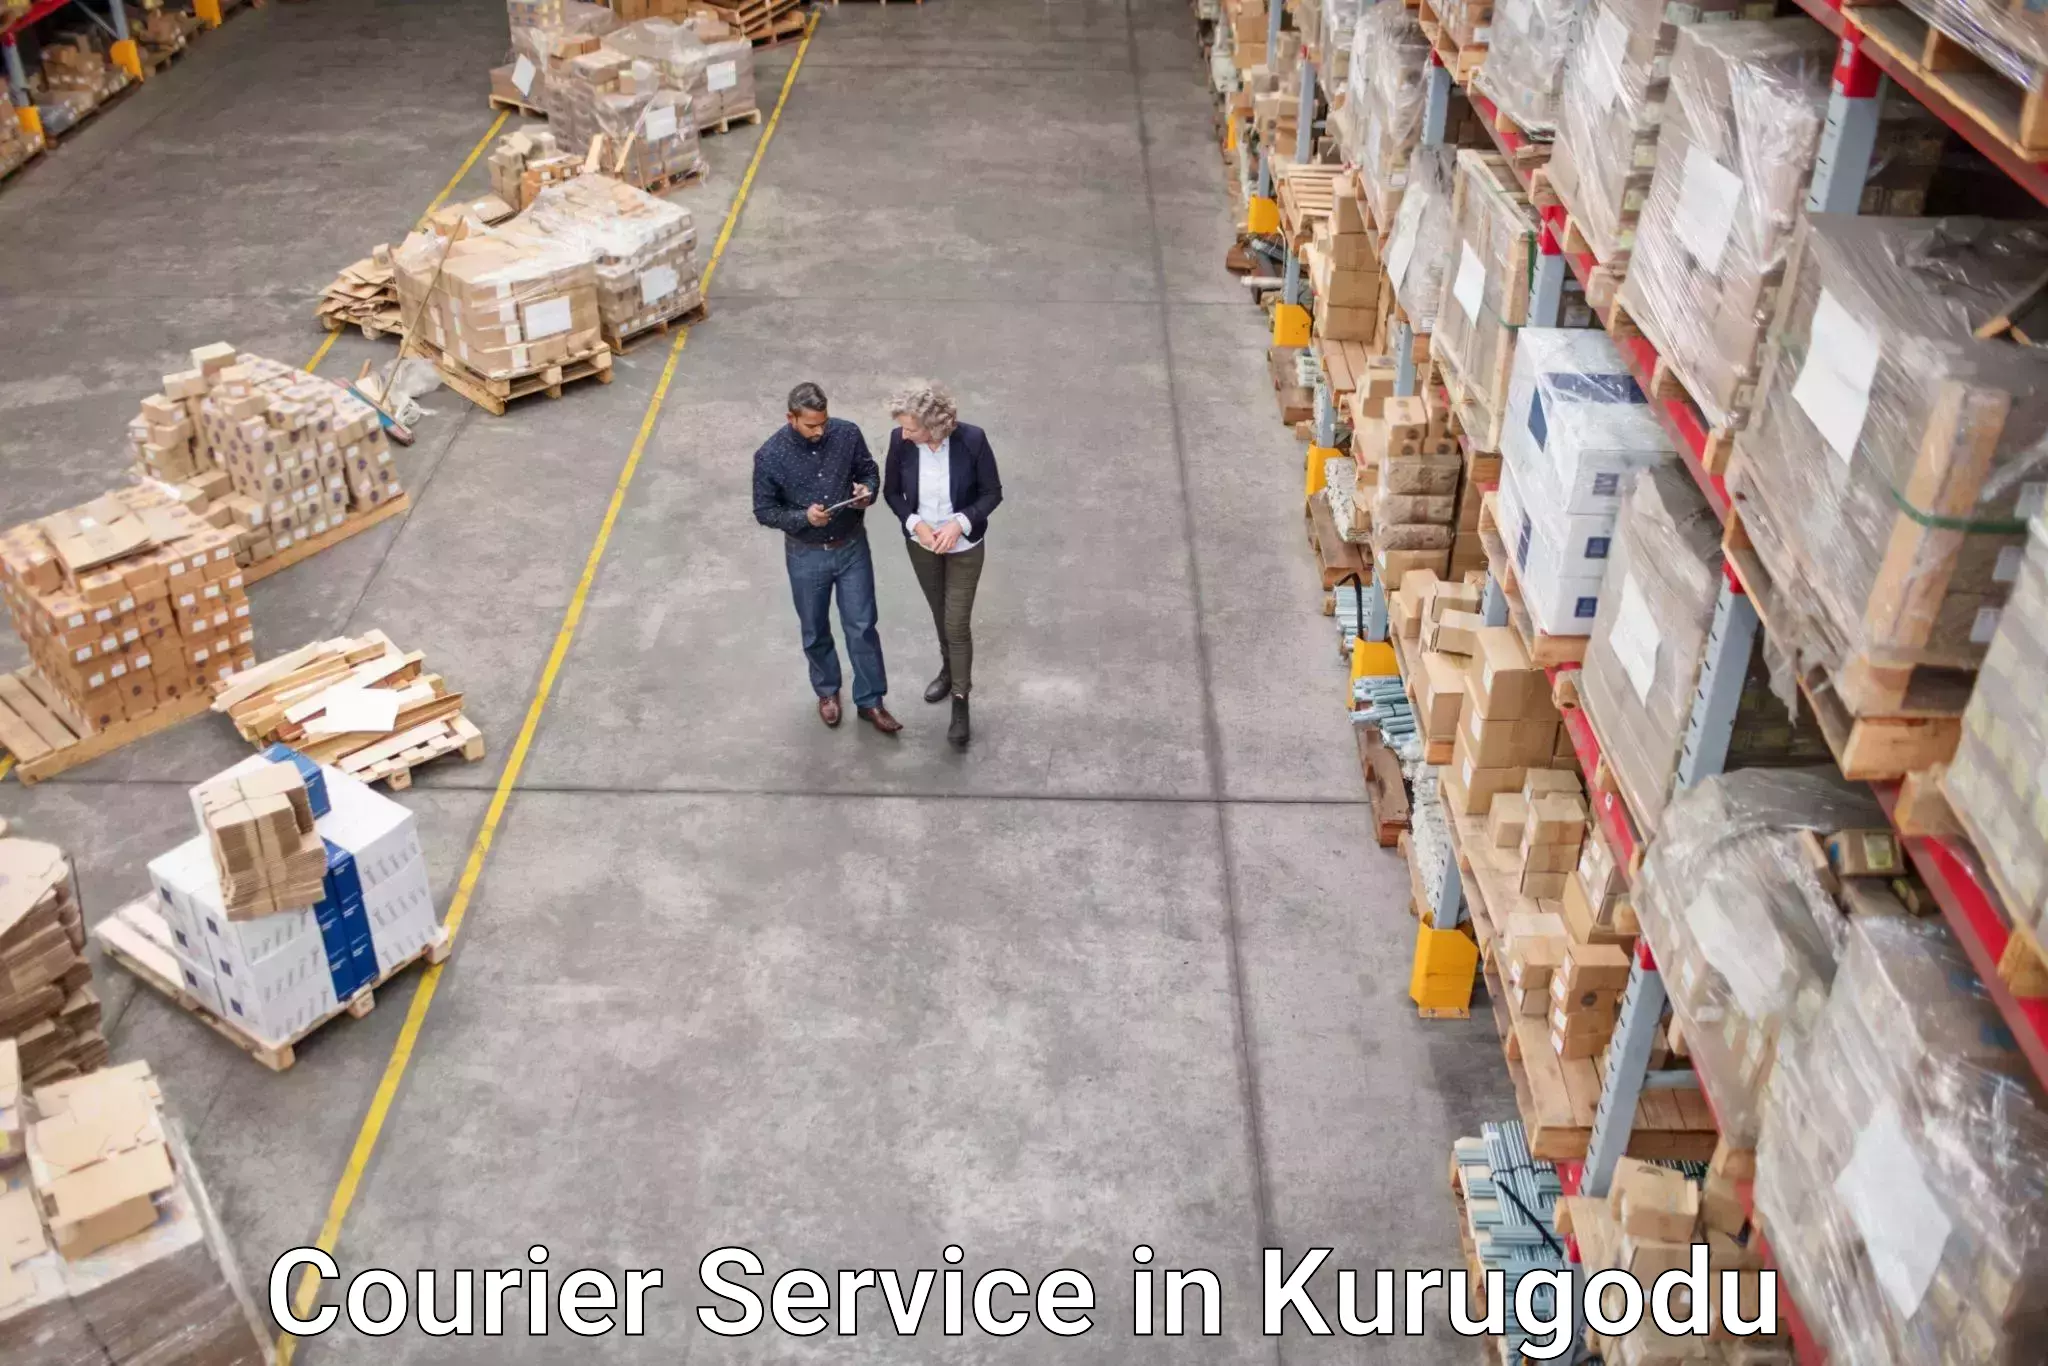 On-call courier service in Kurugodu